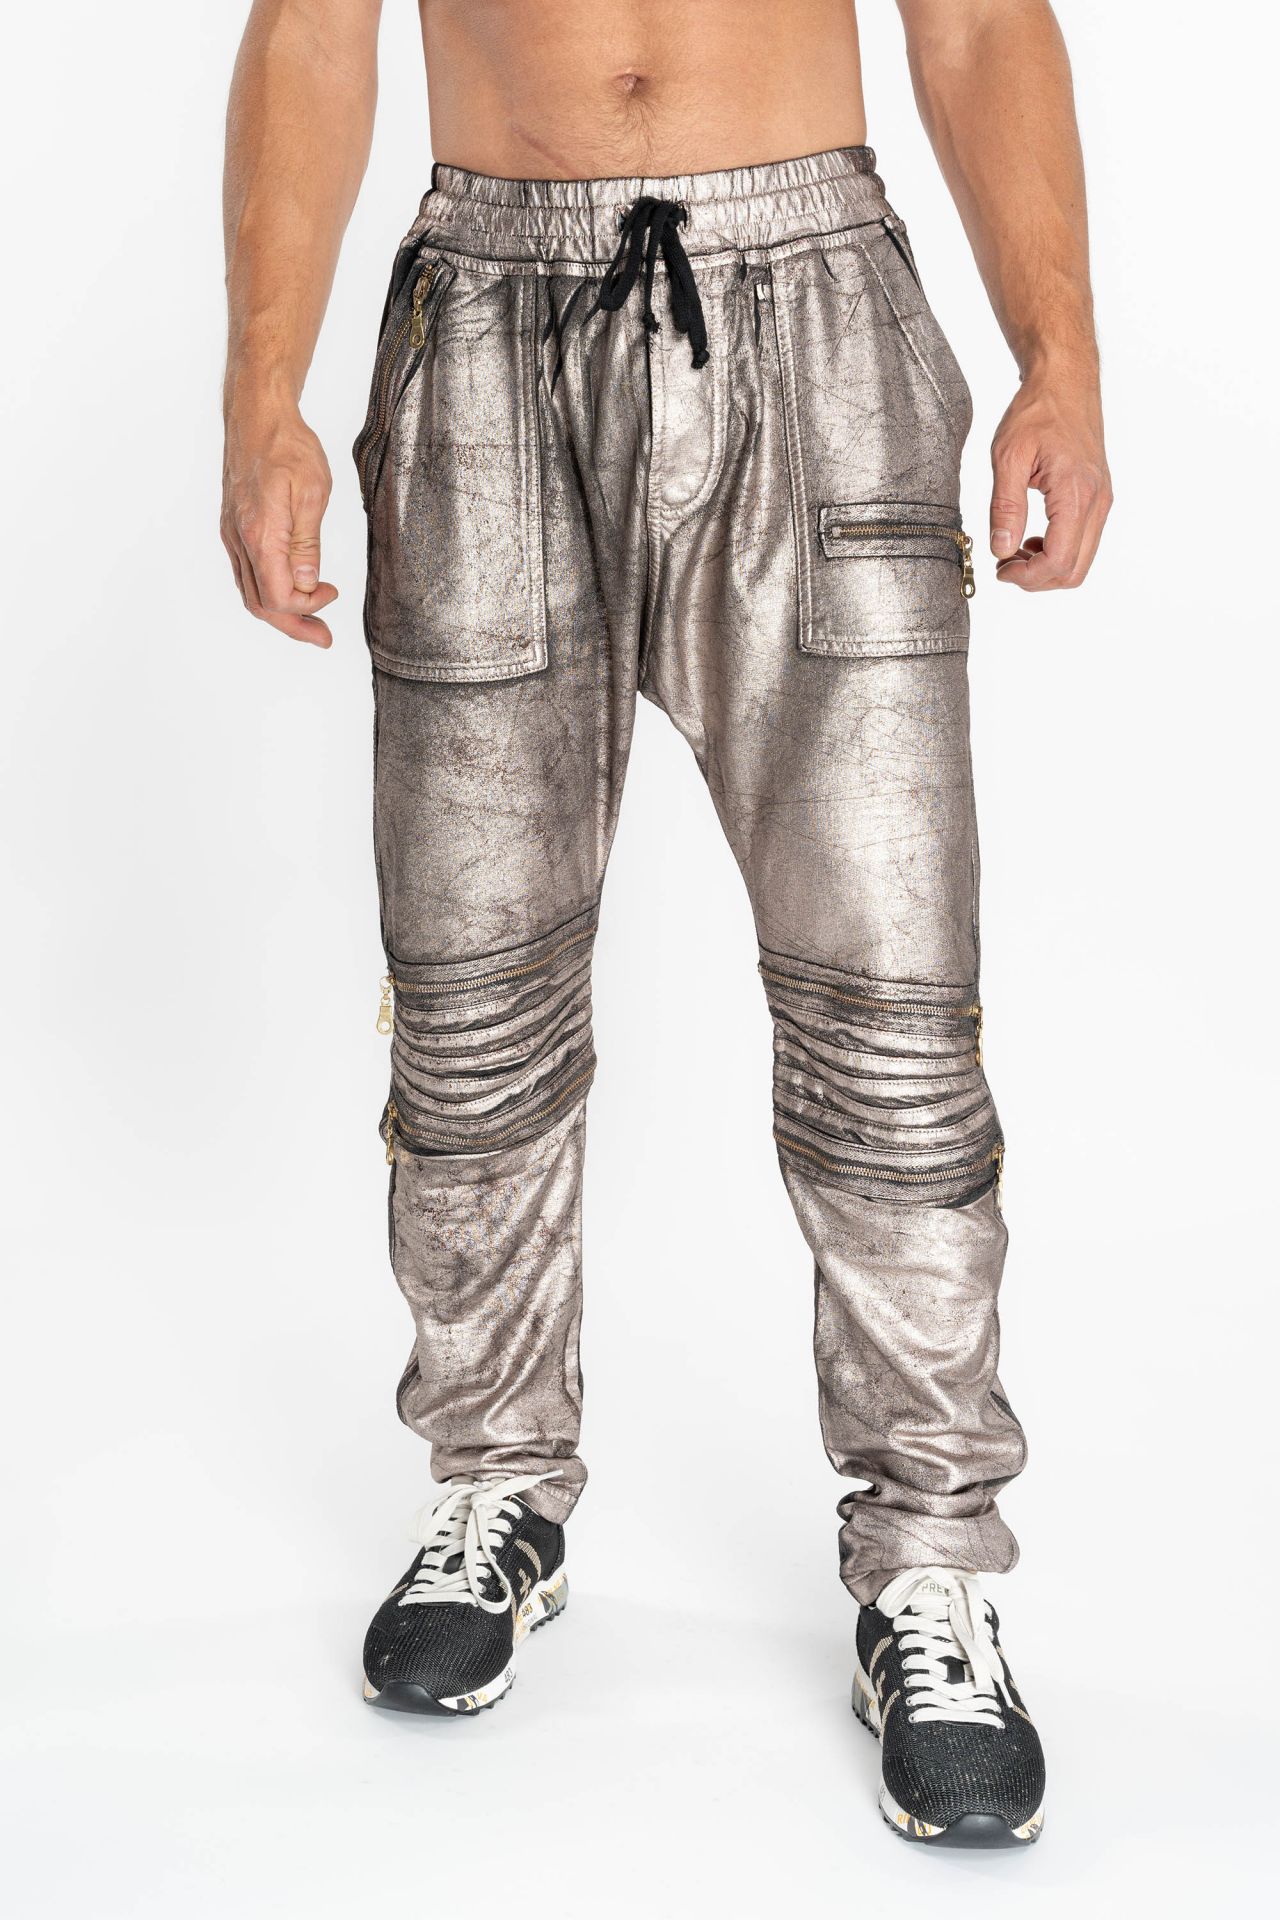 MENS LOW CROTCH MOTO JOGGER WITH ZIPS IN SUNLIGHT ROSE GOLD